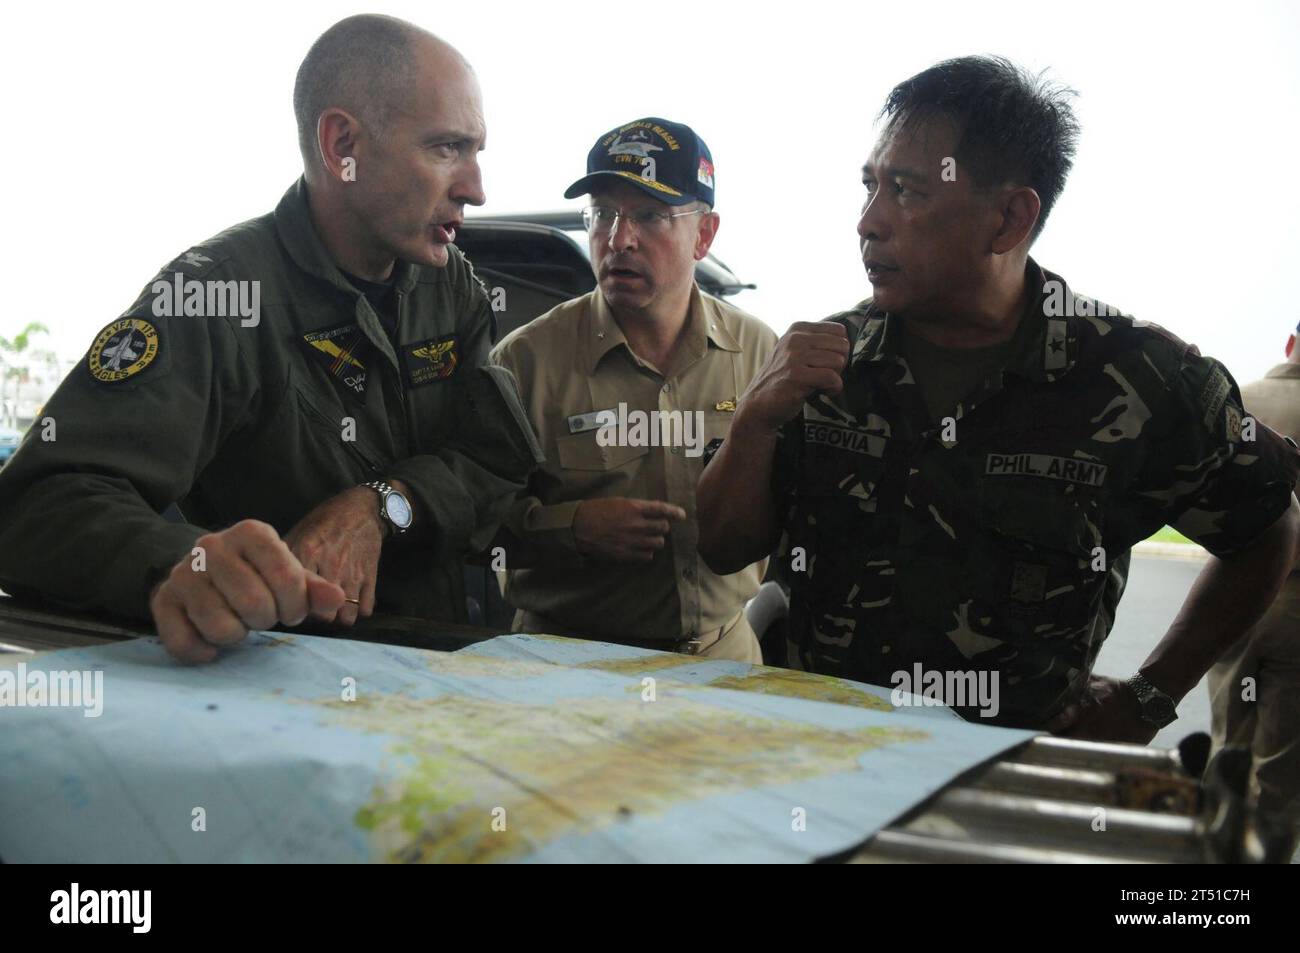 0806264009P-040 PHILIPPINES (June 26, 2008) Rear Adm. James P. Wisecup, commander, Carrier Strike Group (CSG) 7, center, Brig. Gen. Jorge Segovia, deputy assistant chief of staff for Operations of Armed Forces Philippines (AFP), right, and Capt. Thomas P. Lalor, deputy commander of Carrier Air Wing (CVW) 14, discuss the current relief efforts of the Nimitz-class aircraft carrier USS Ronald Reagan (CVN 76). At the request of the government of the Republic of the Philippines, Ronald Reagan is off the coast of Panay Island providing humanitarian assistance and disaster response in the wake of Typ Stock Photo